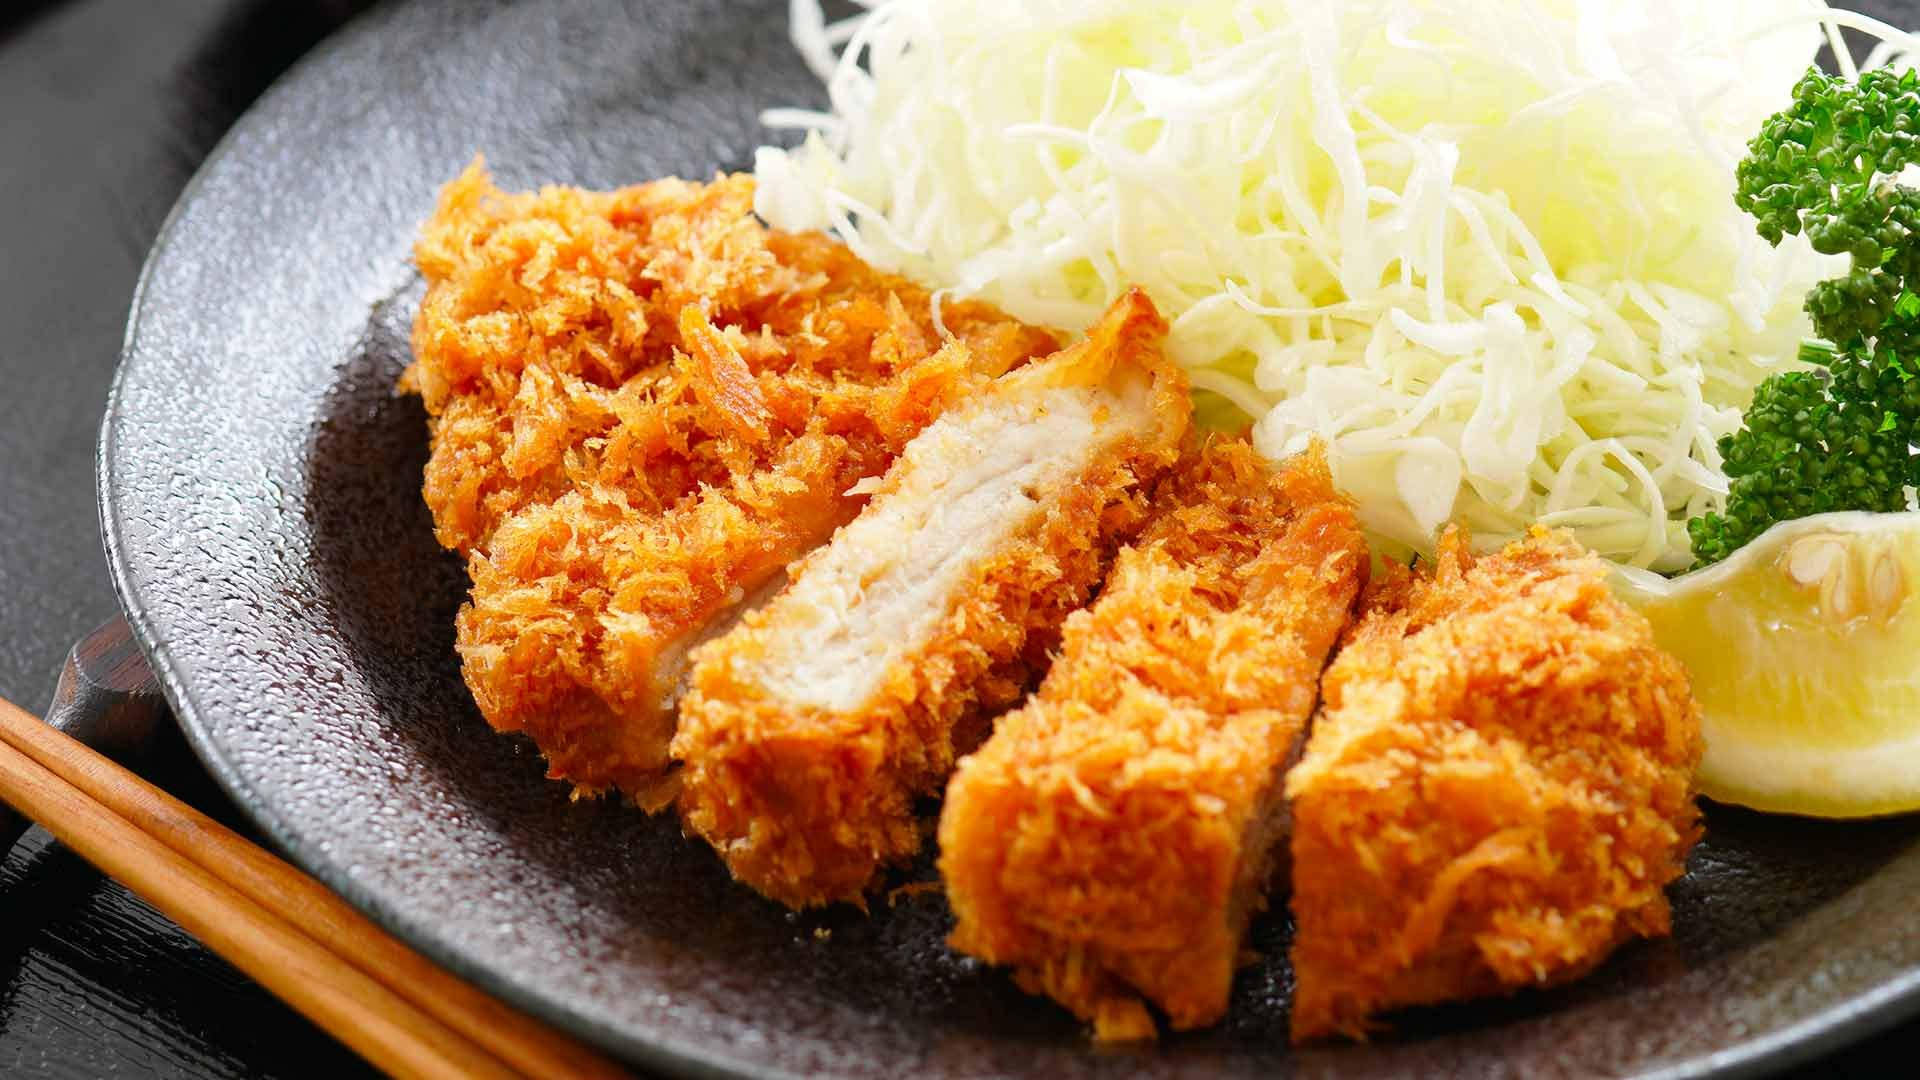 Authentic Japanese Tonkatsu - Deep Fried Pork Cutlet With Shredded Cabbage Wallpaper